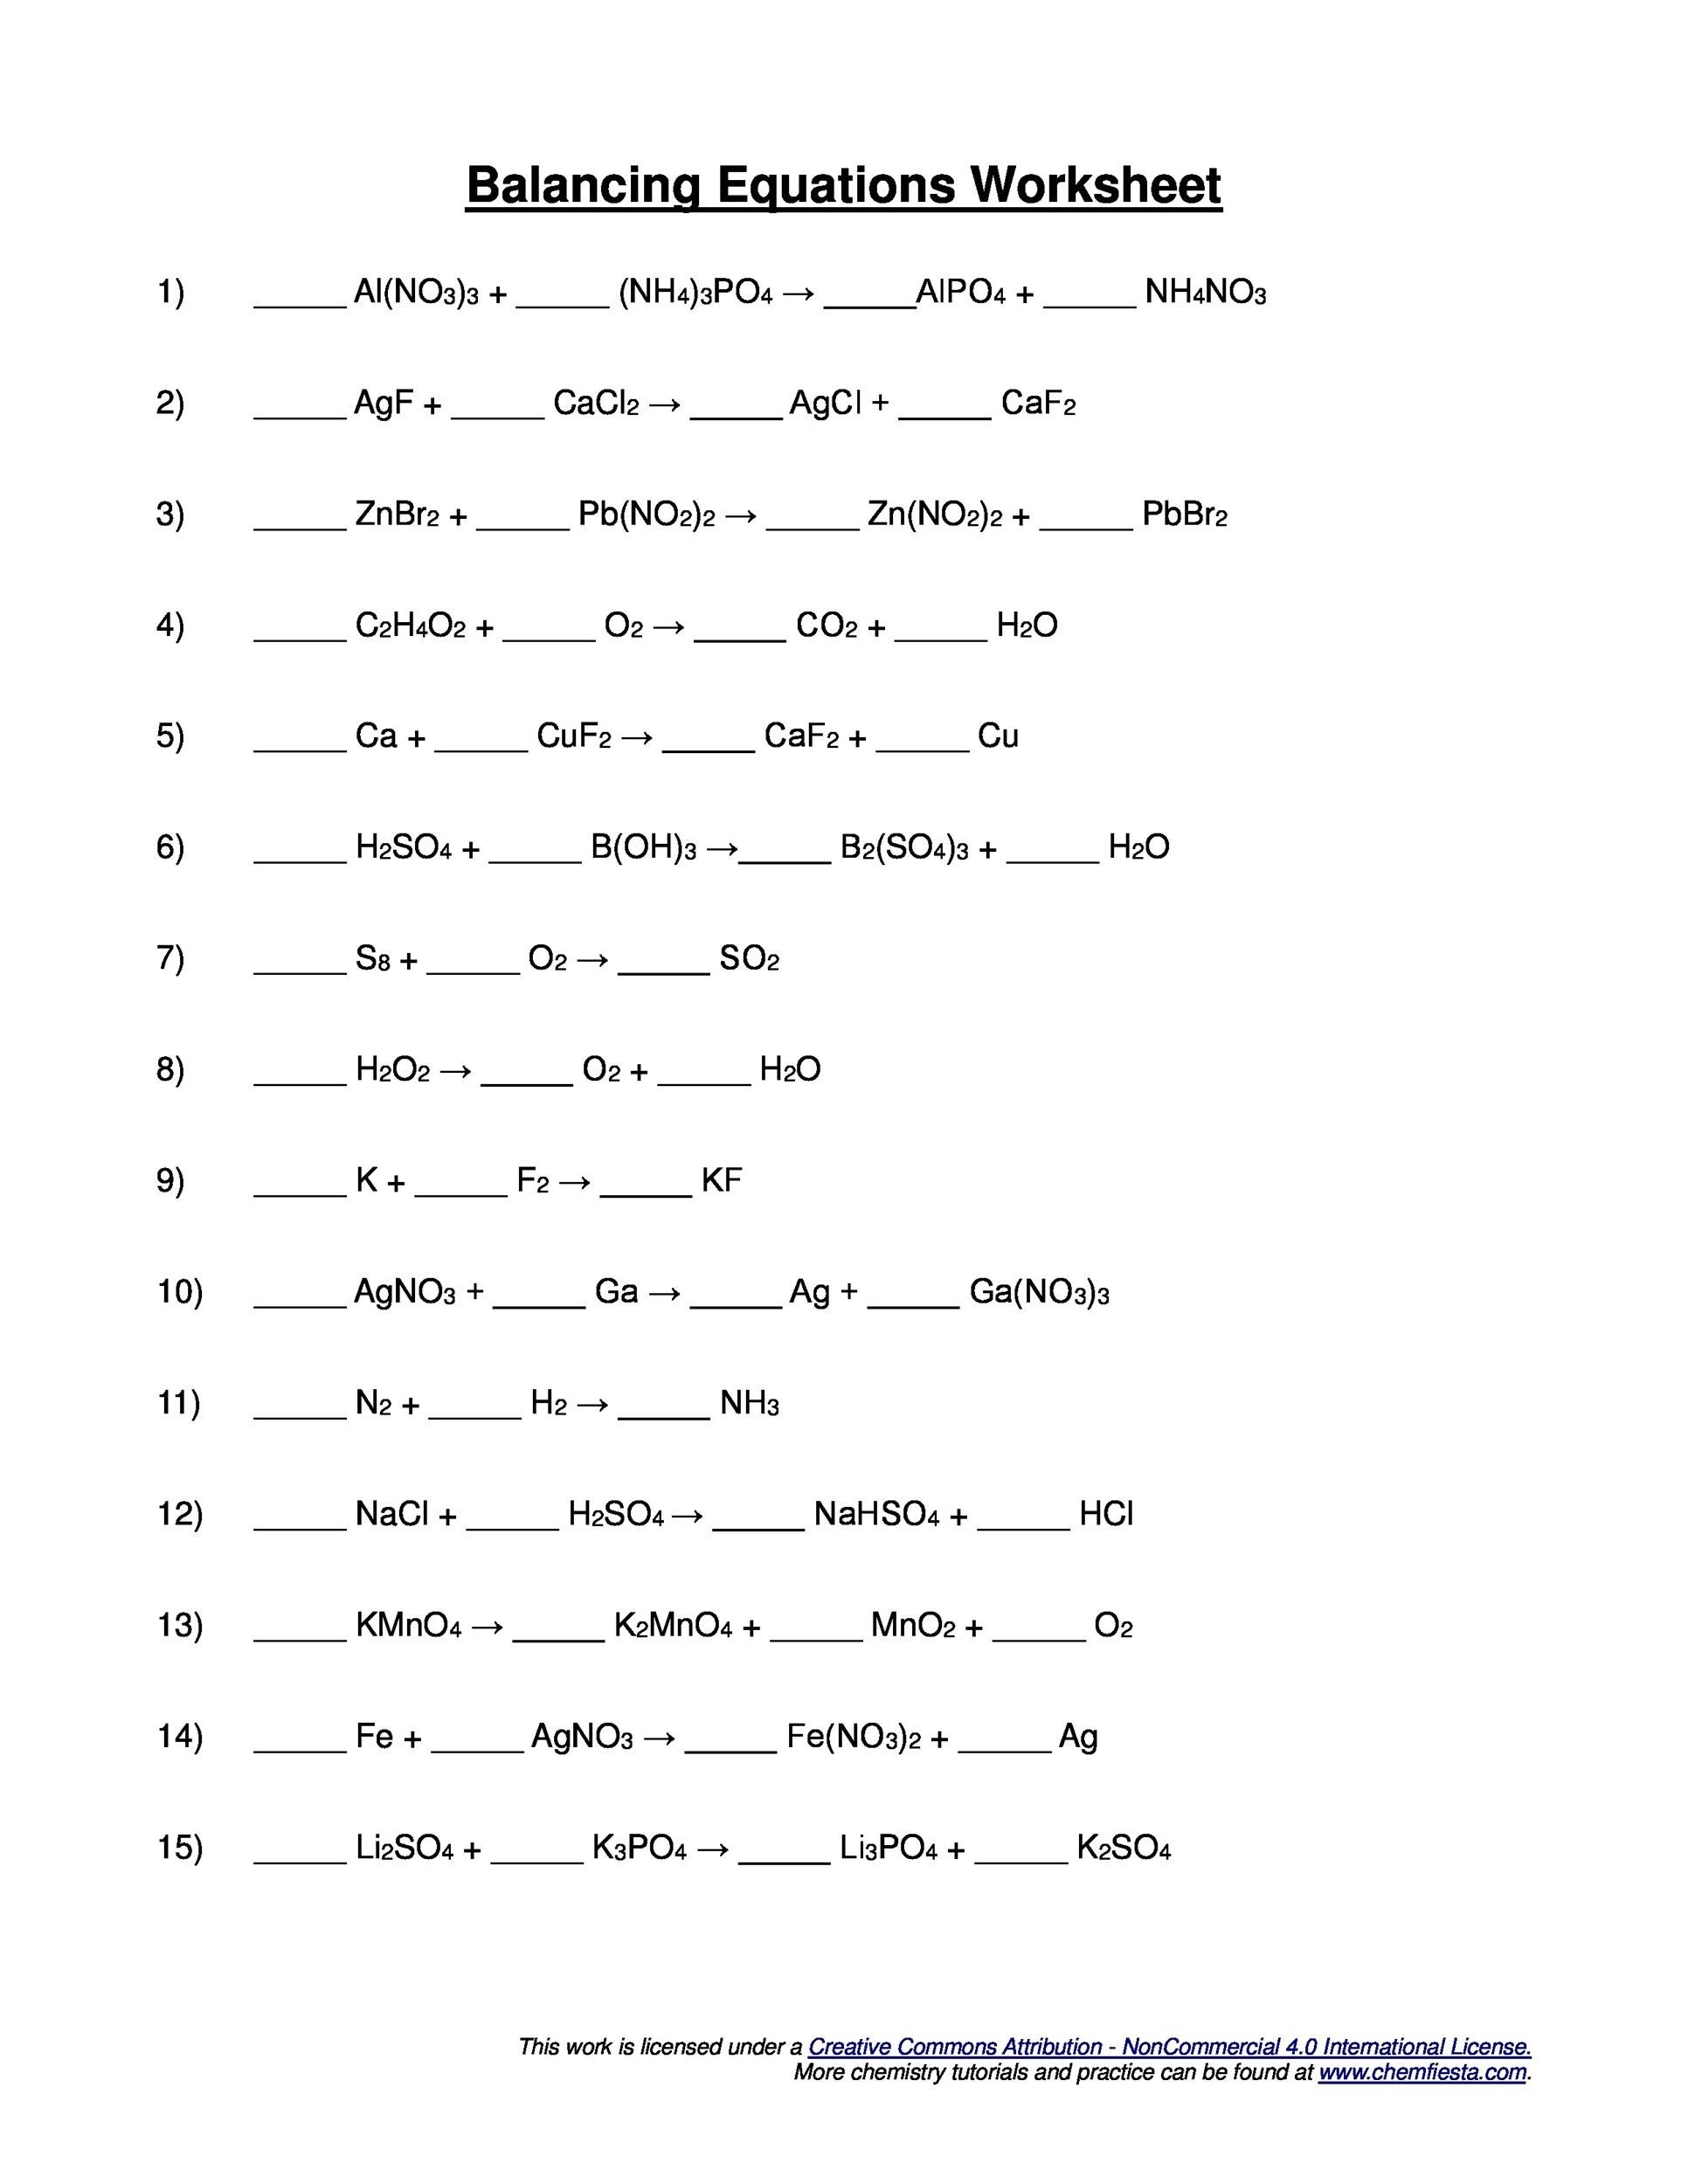 Online homework help for balanced equations: Homework Help Regarding Balancing Equations Worksheet Answers Chemistry